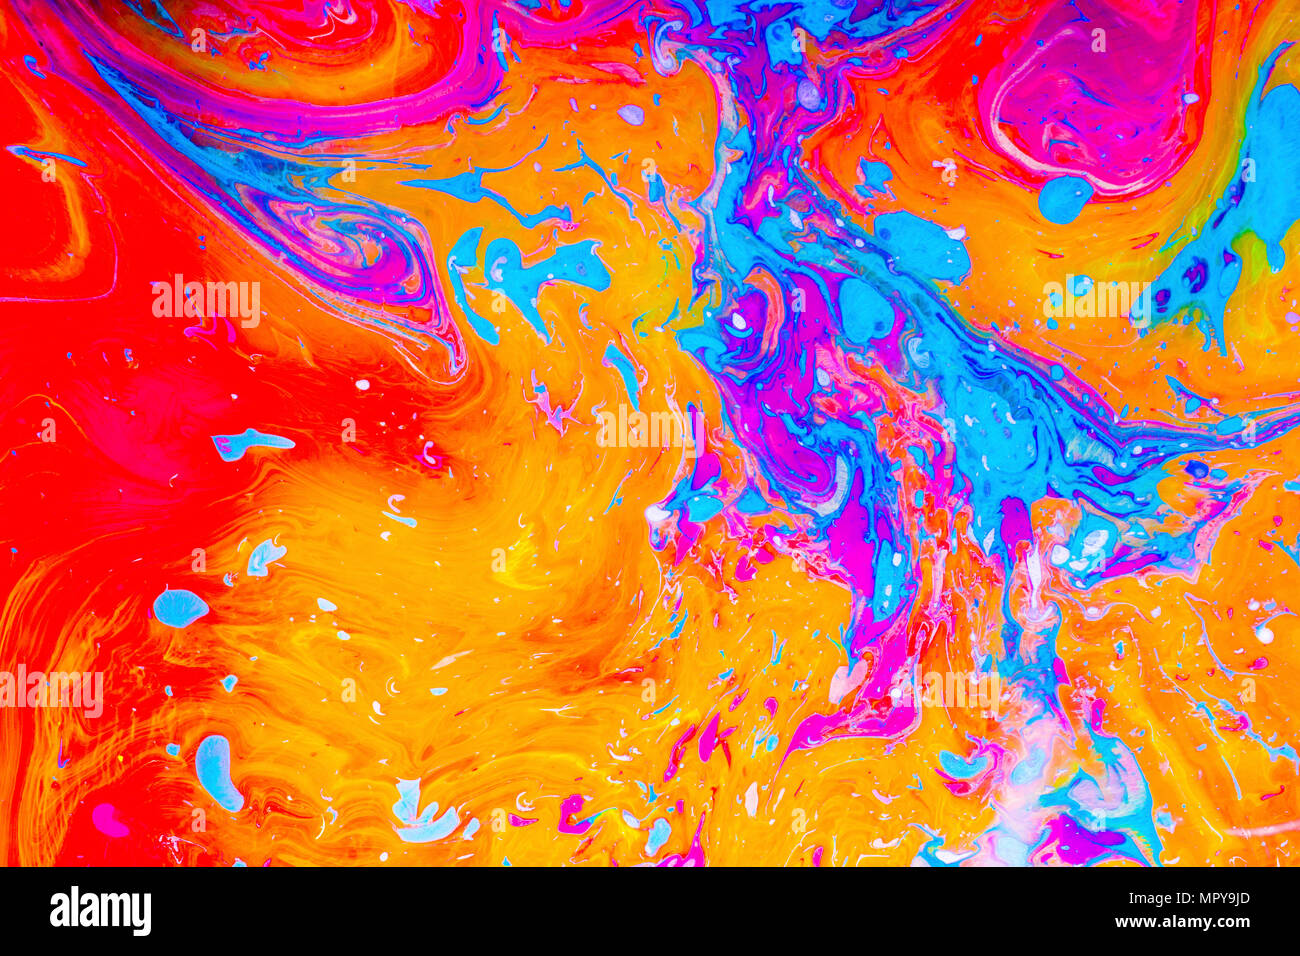 High angle view of vibrant color marbling painting Stock Photo